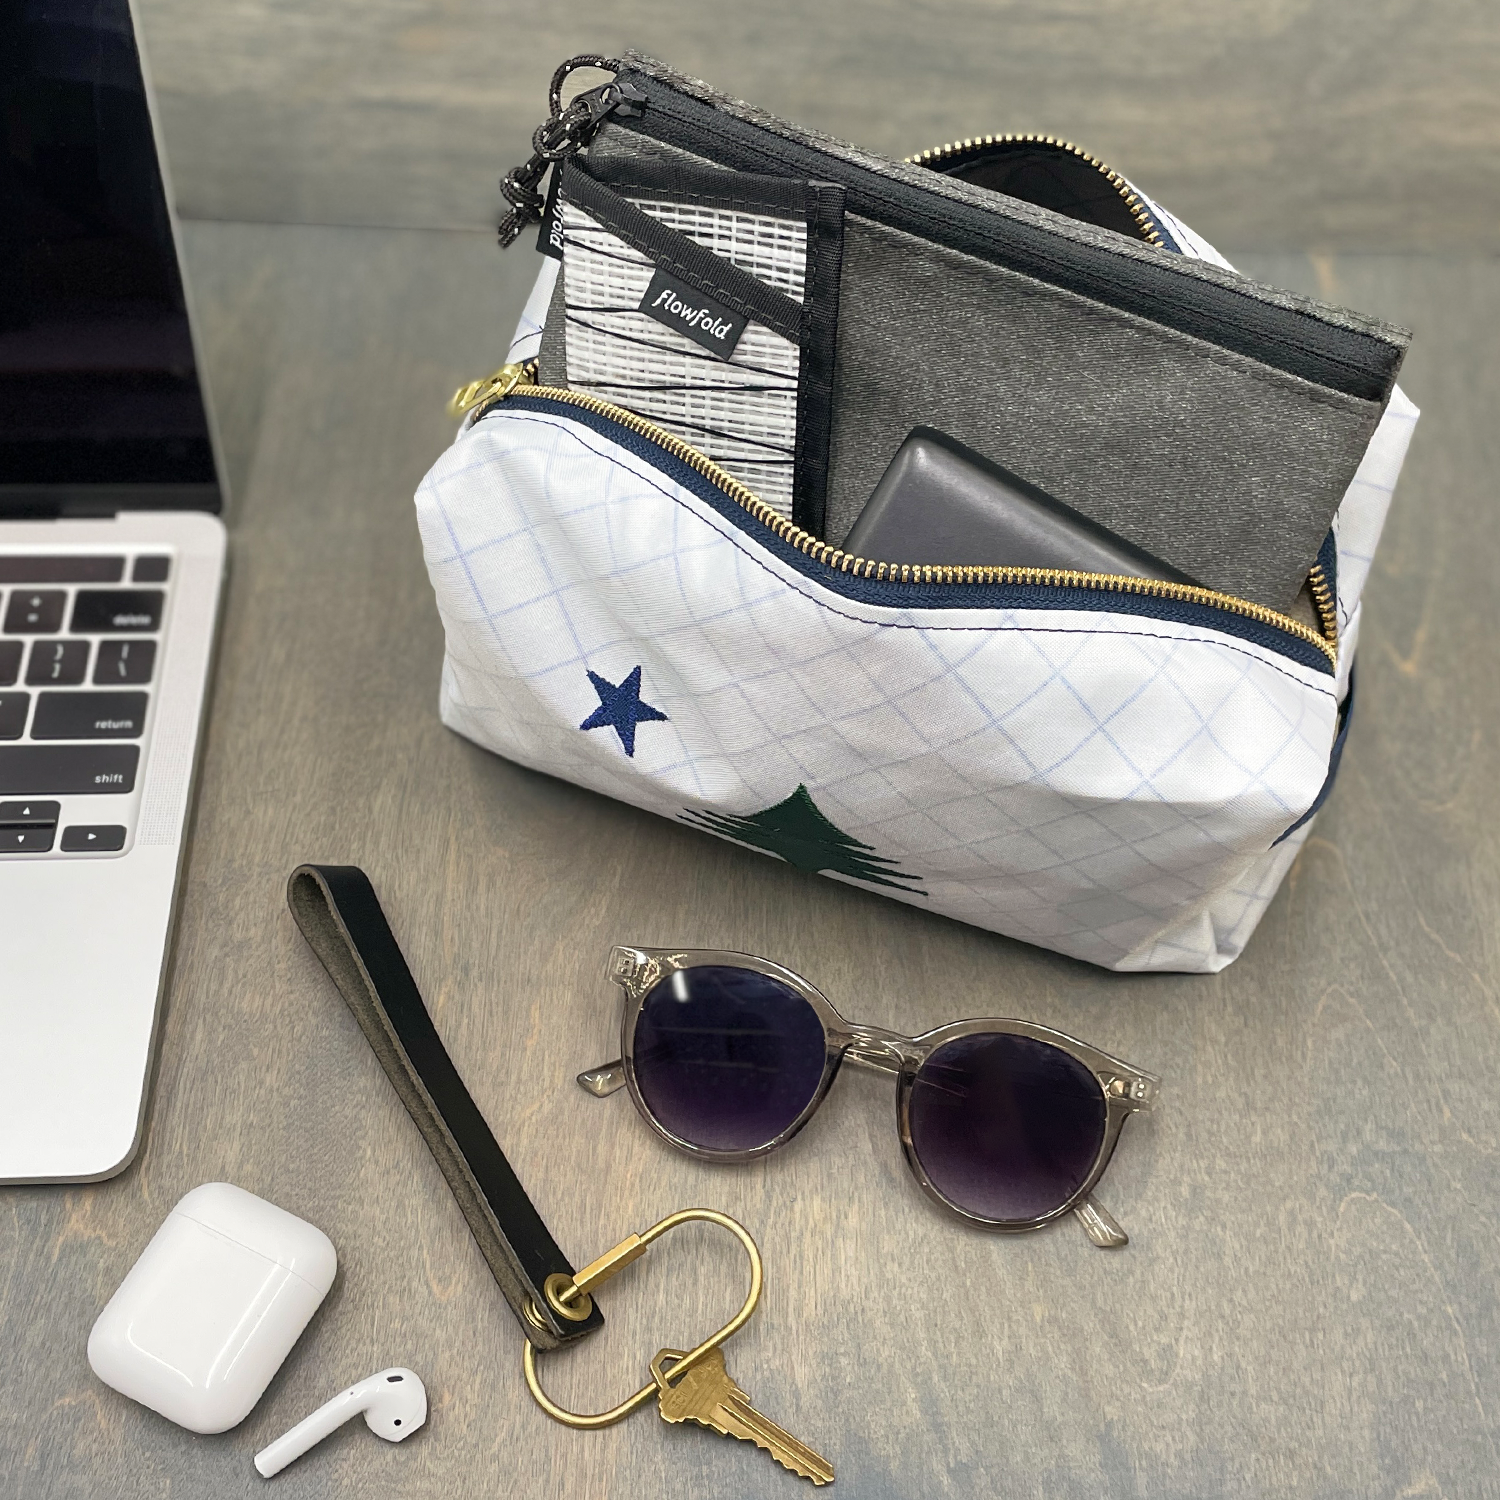 Original Maine x Flowfold White Aviator Dopp Kit Water Resistant Fabric Made in the USA, On Wood with Tech Gear